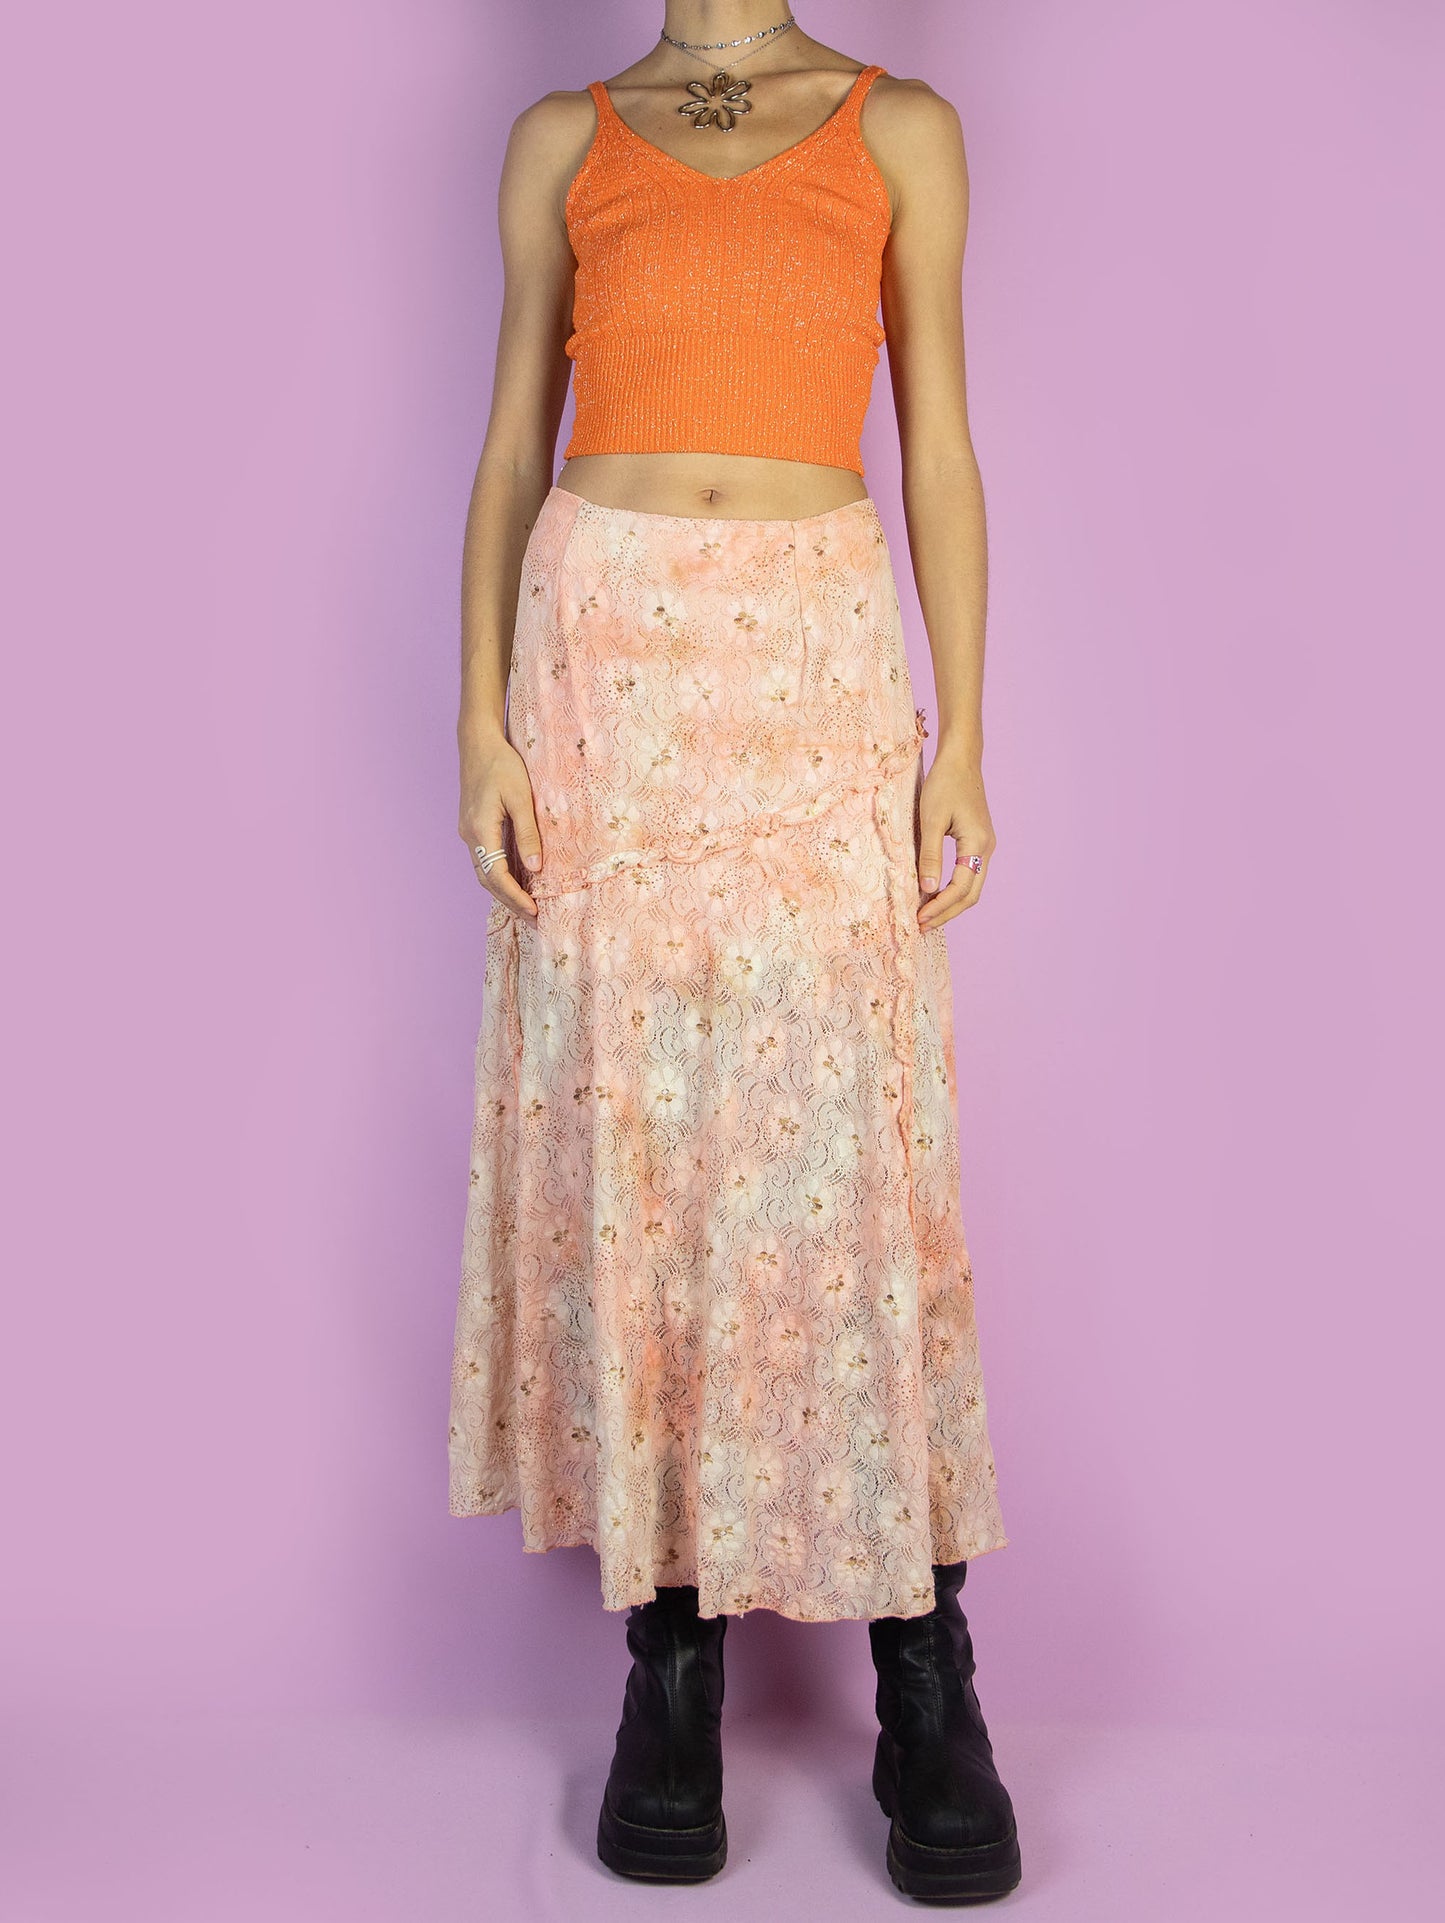 The Vintage 90s Fairy Orange Midi Skirt is a light orange and beige lace mesh skirt with glitter and ruffle details and a side zipper closure. Romantic boho 1990s pastel floral maxi skirt.